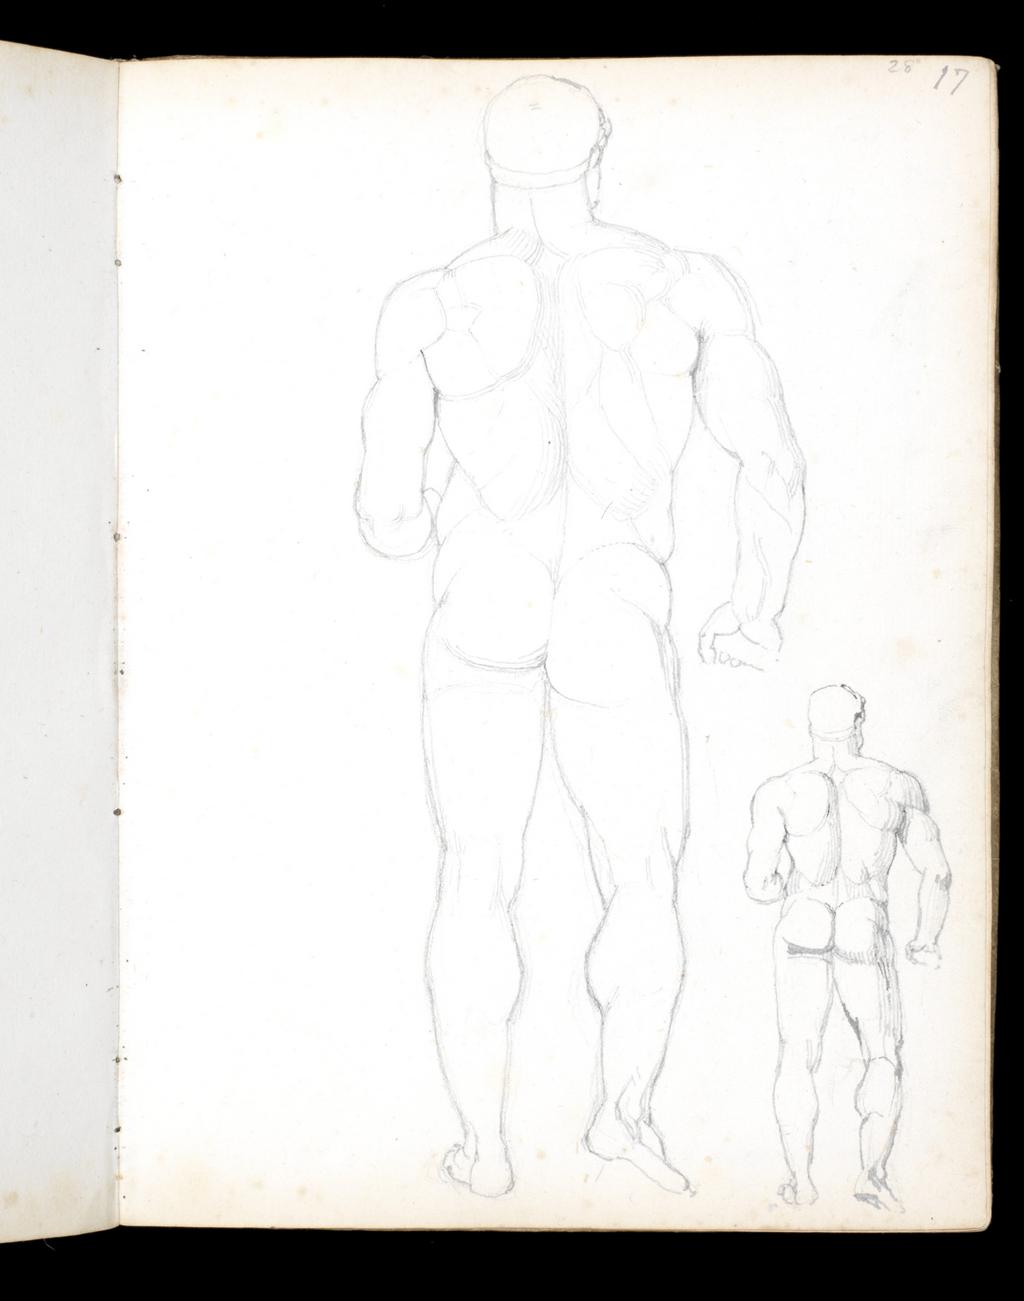 An image of Sketchbook: Motion and Equilibrium of the Human Body. Flaxman, John (British, 1755-1826). Sketchbook bound in ?pig's skin, containing 60 leaves plus two endpapers. Height, leaf, 230 mm, width, leaf, 171 mm; height, cover board, 232 mm, width, cover board, 173 mm.